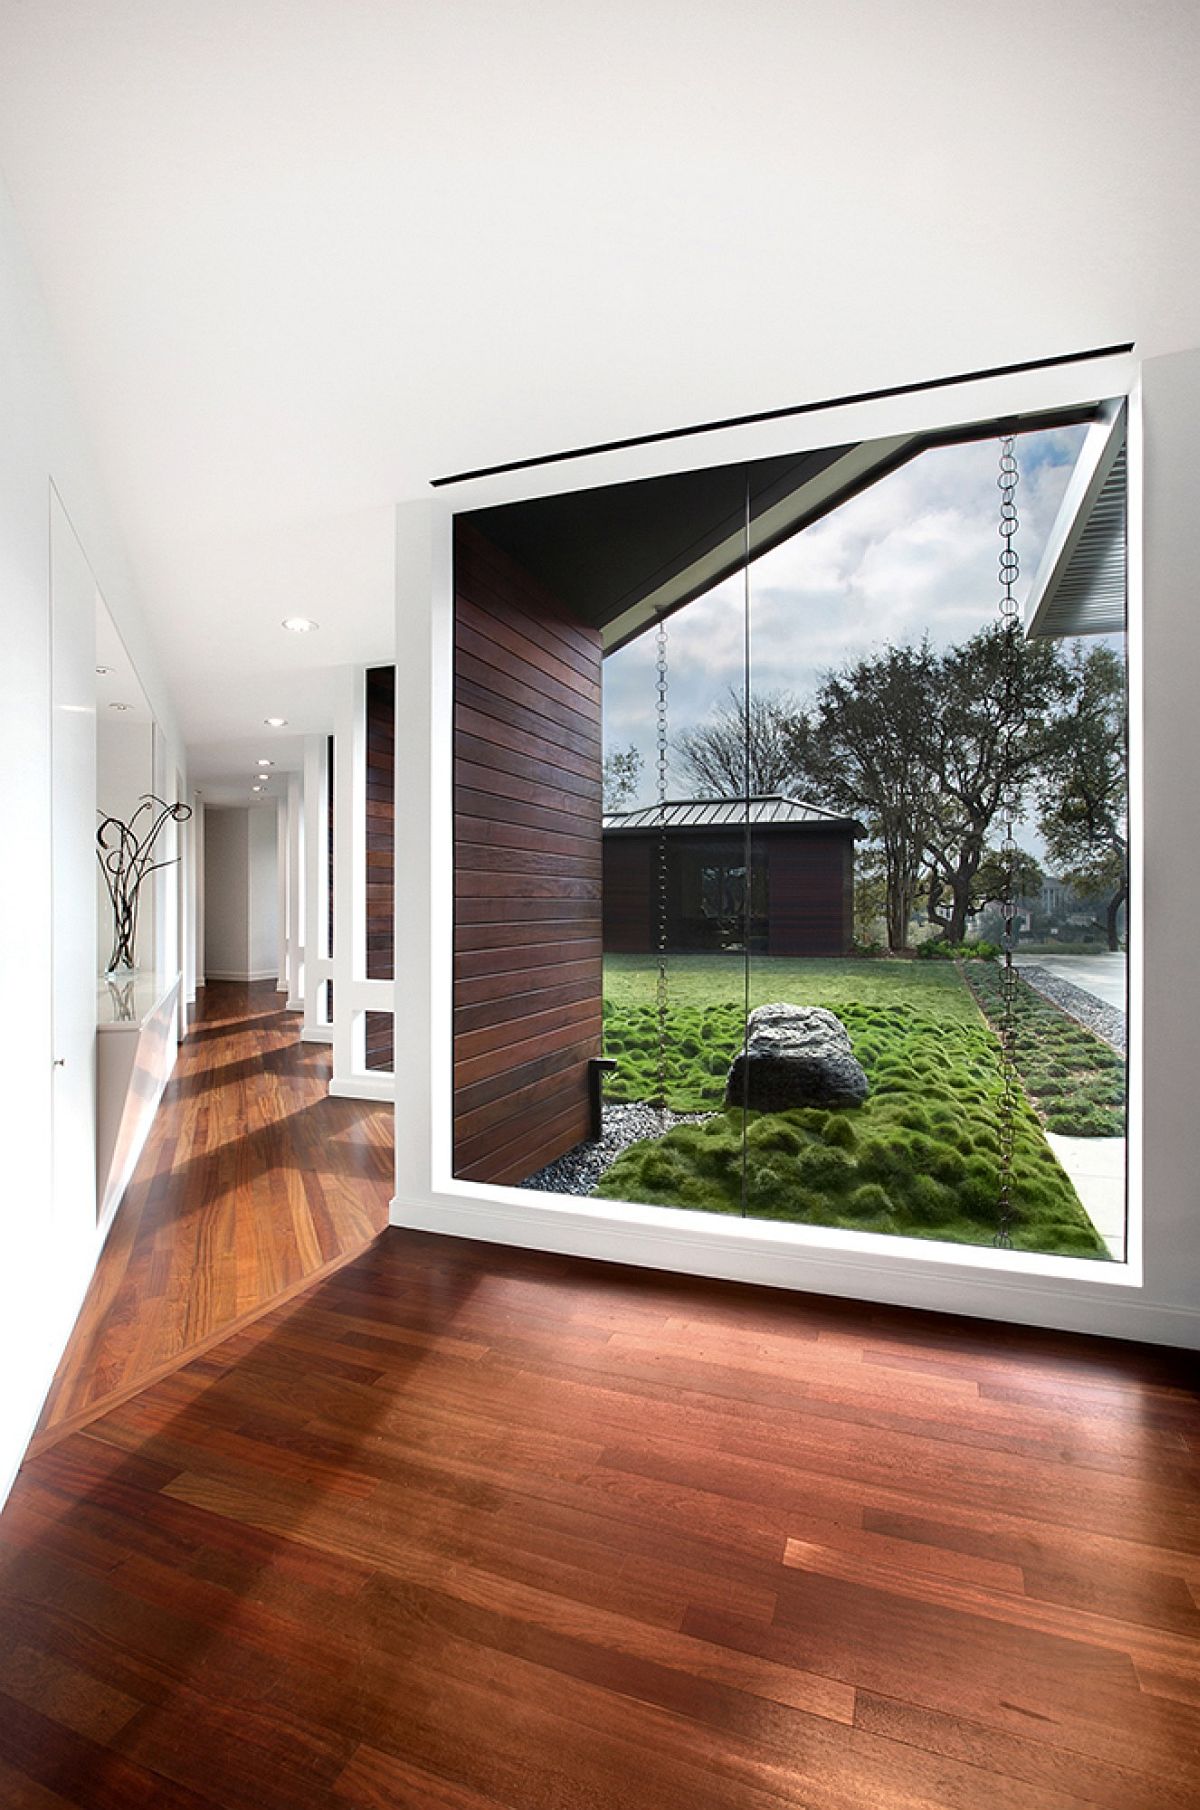 Beautifully framed views bring the landscape indoors